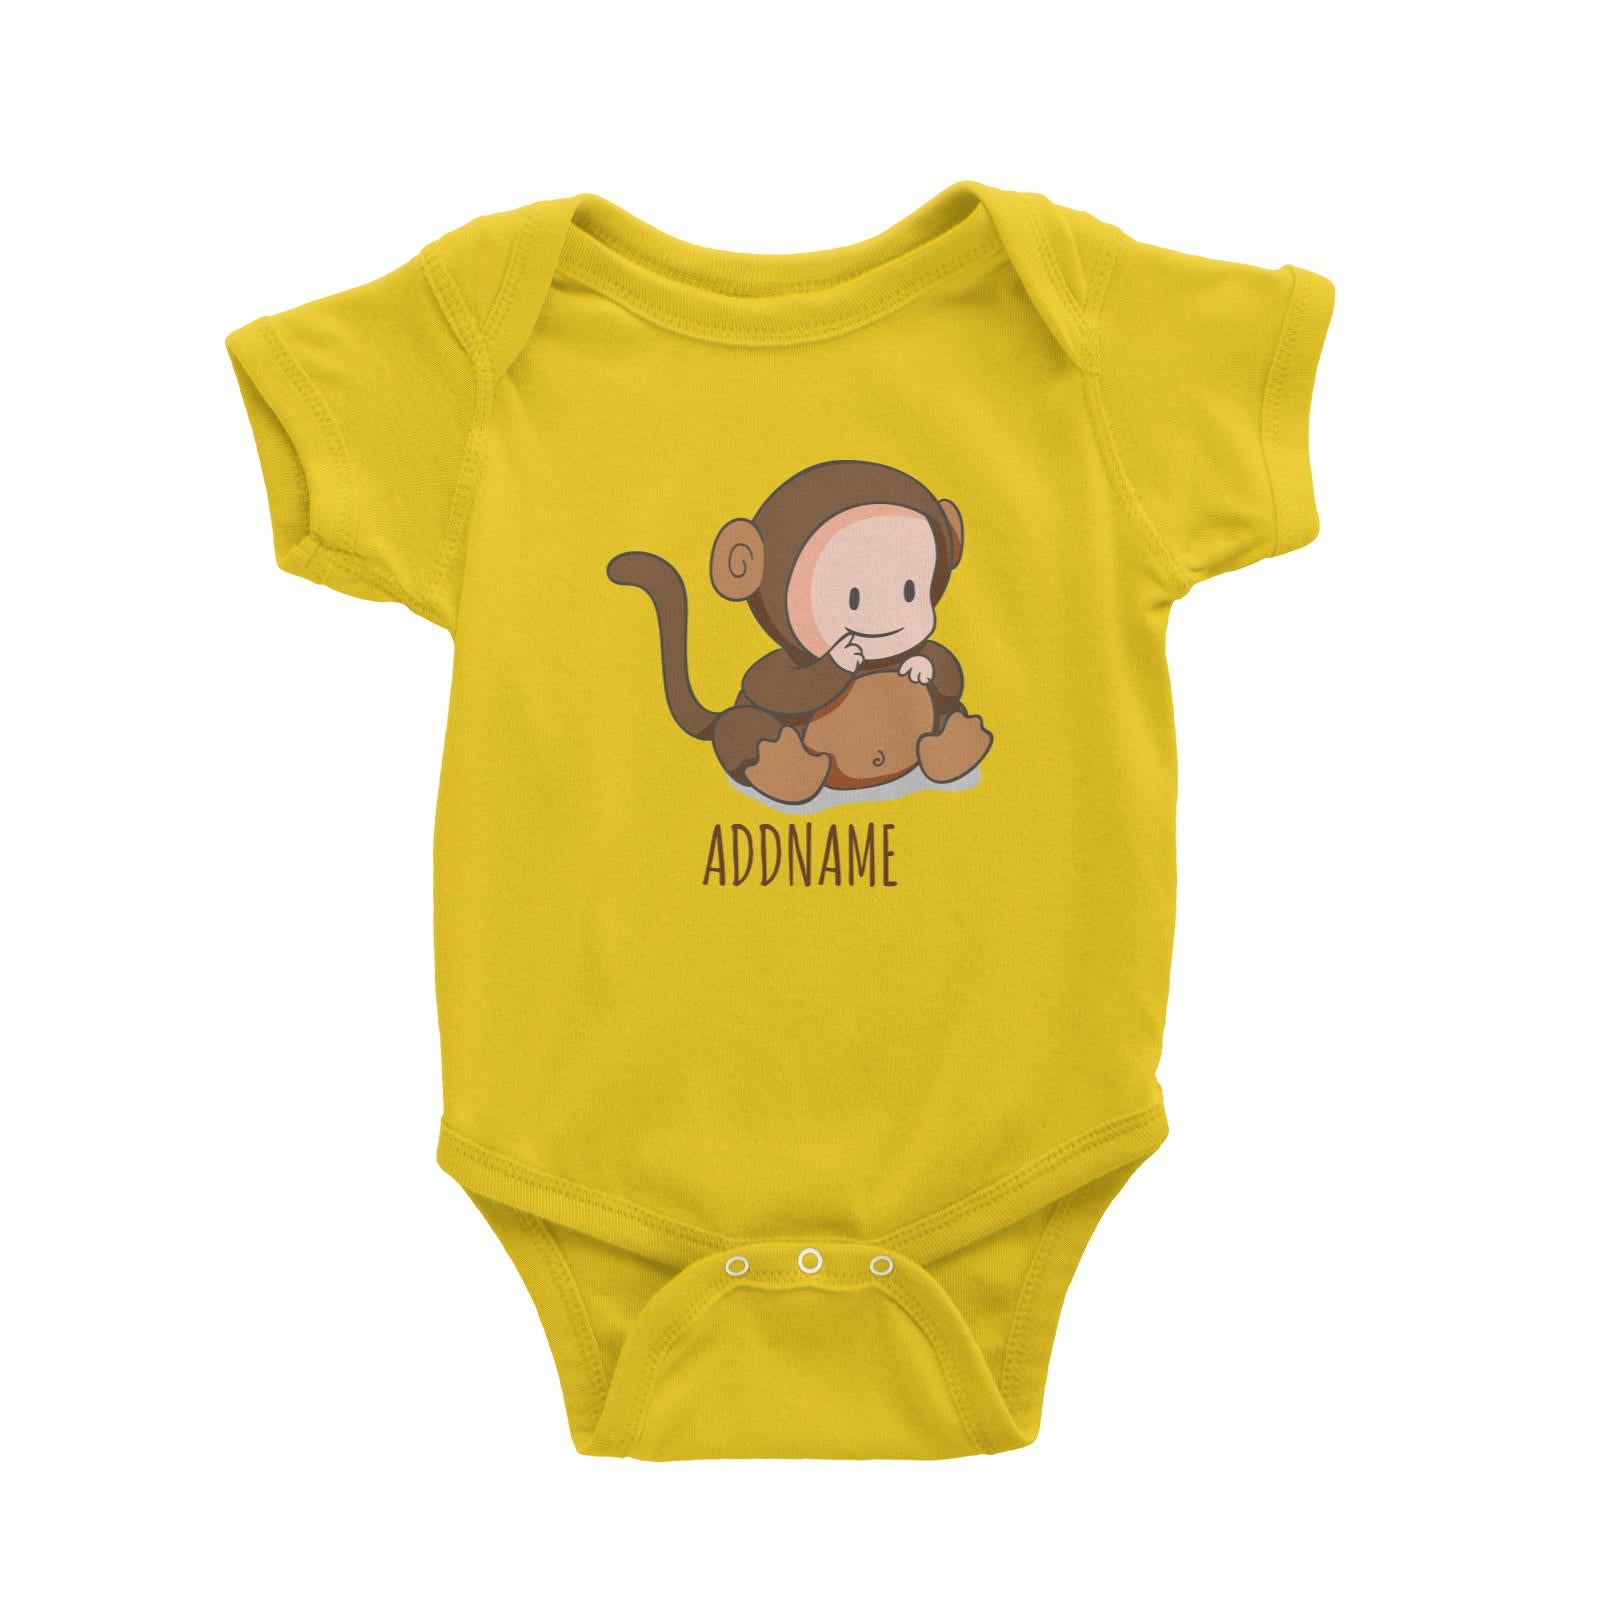 Cute Baby in Brown Monkey Suit Addname Baby Romper